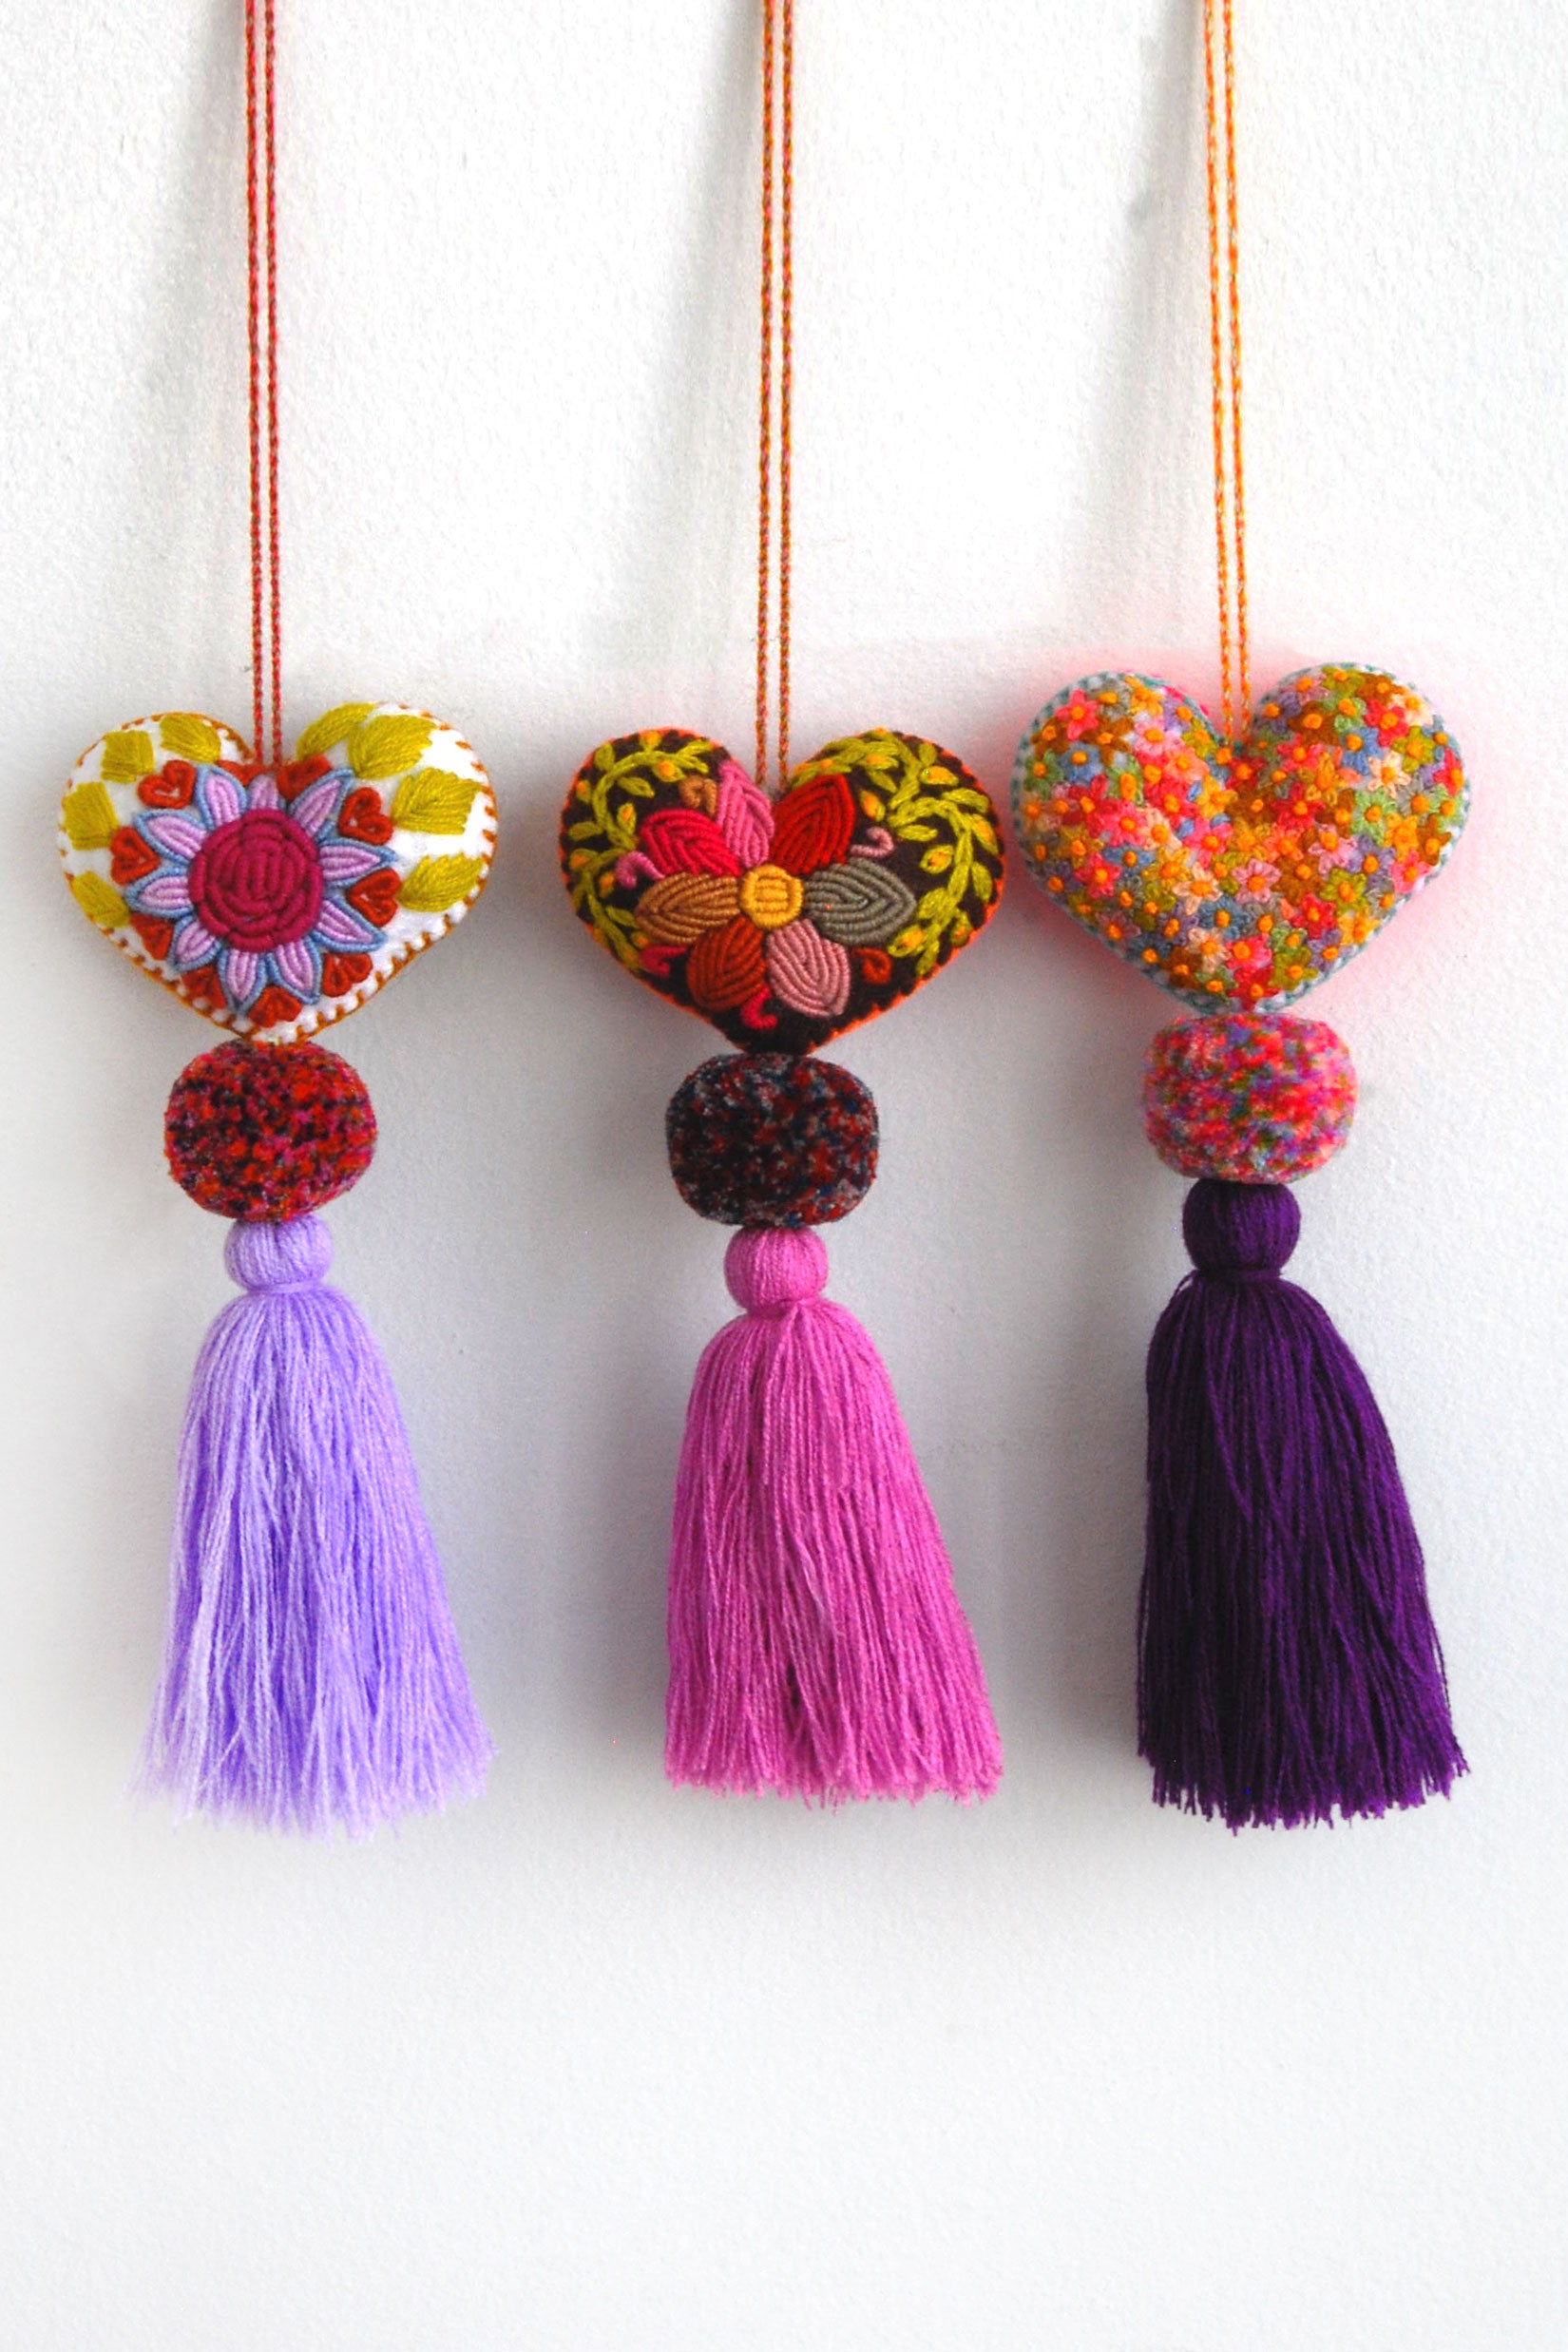 Three colorful plush felt hearts adorned with flower embroidery attached by multicolor speckled pom poms to tassels in varying shades of purple. Each heart is hanging from a string attached to the top of it.